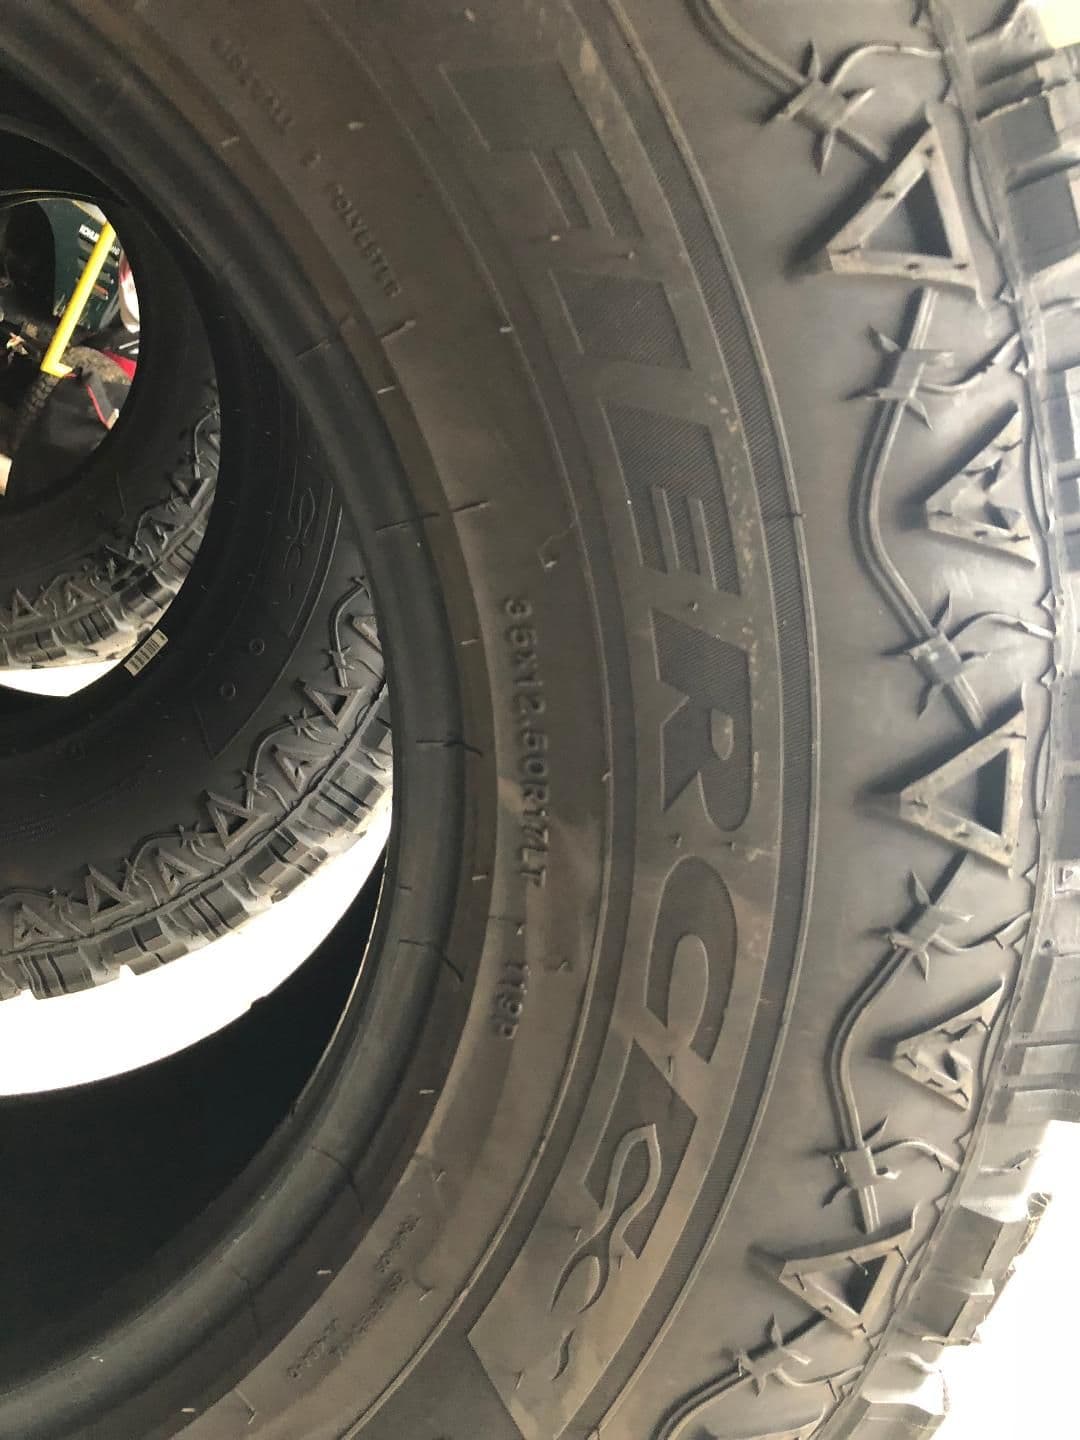 Wheels and Tires/Axles - FS: (5) 35/12/5/17 Fierce M/T Tires with Lots of Life Left - Pick up in CT - Used - Branford, CT 06405, United States